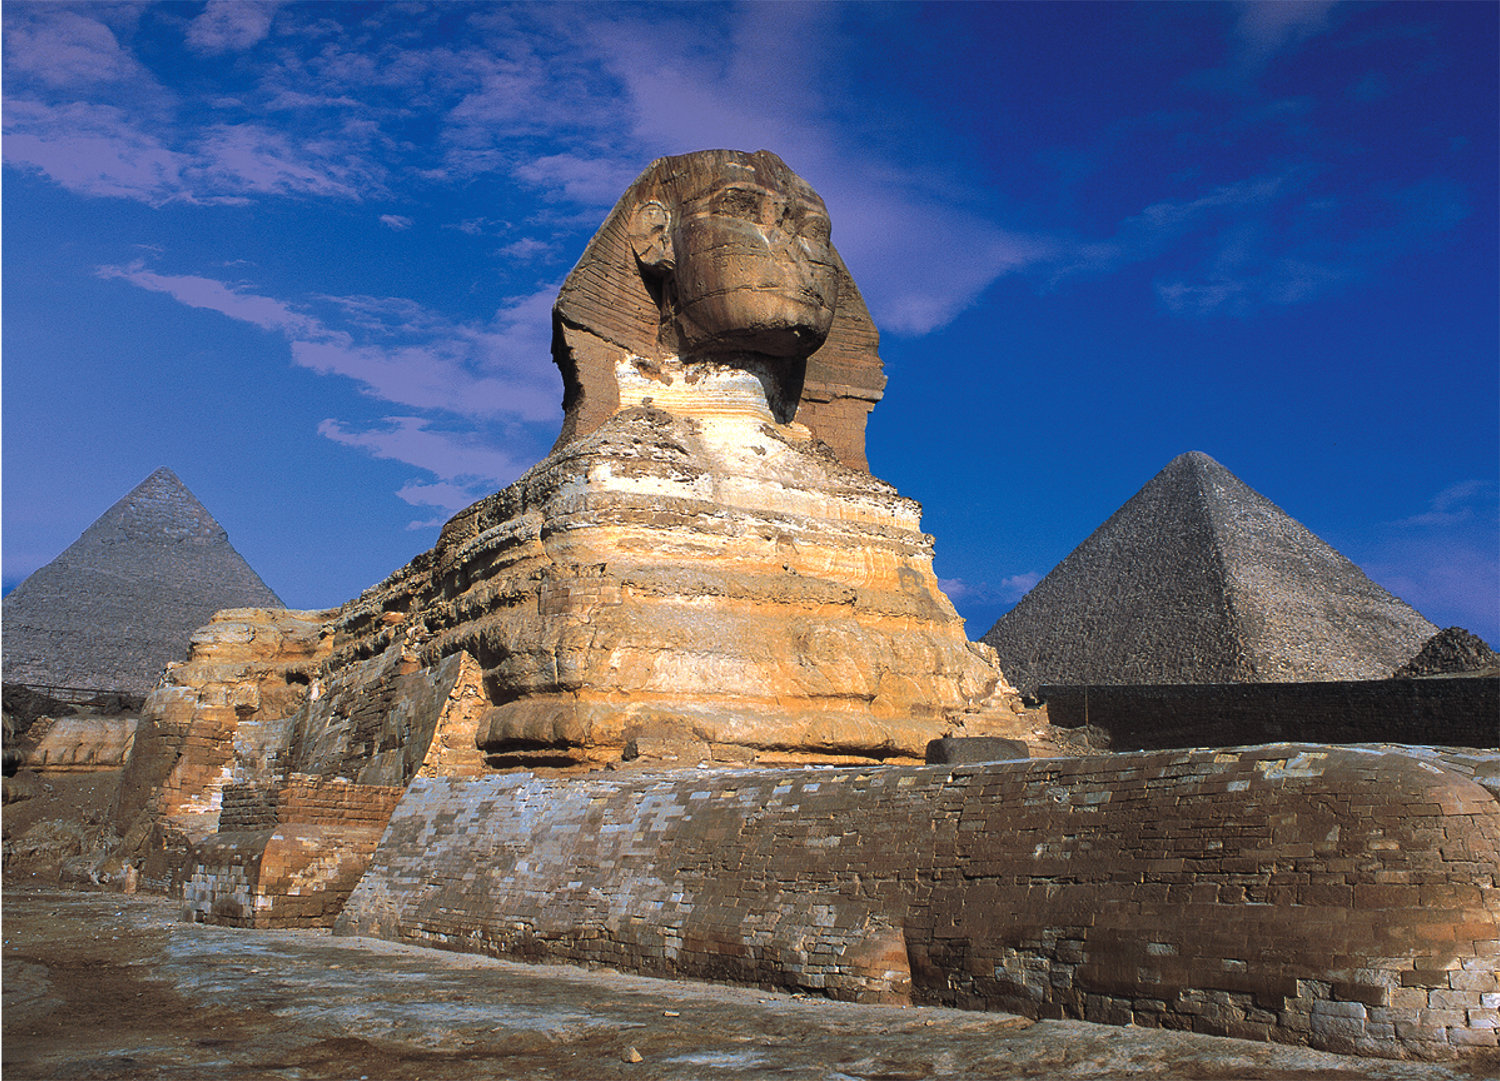 The Great Sphinx of Giza Landmarks & Monuments Glow in the Dark Puzzle